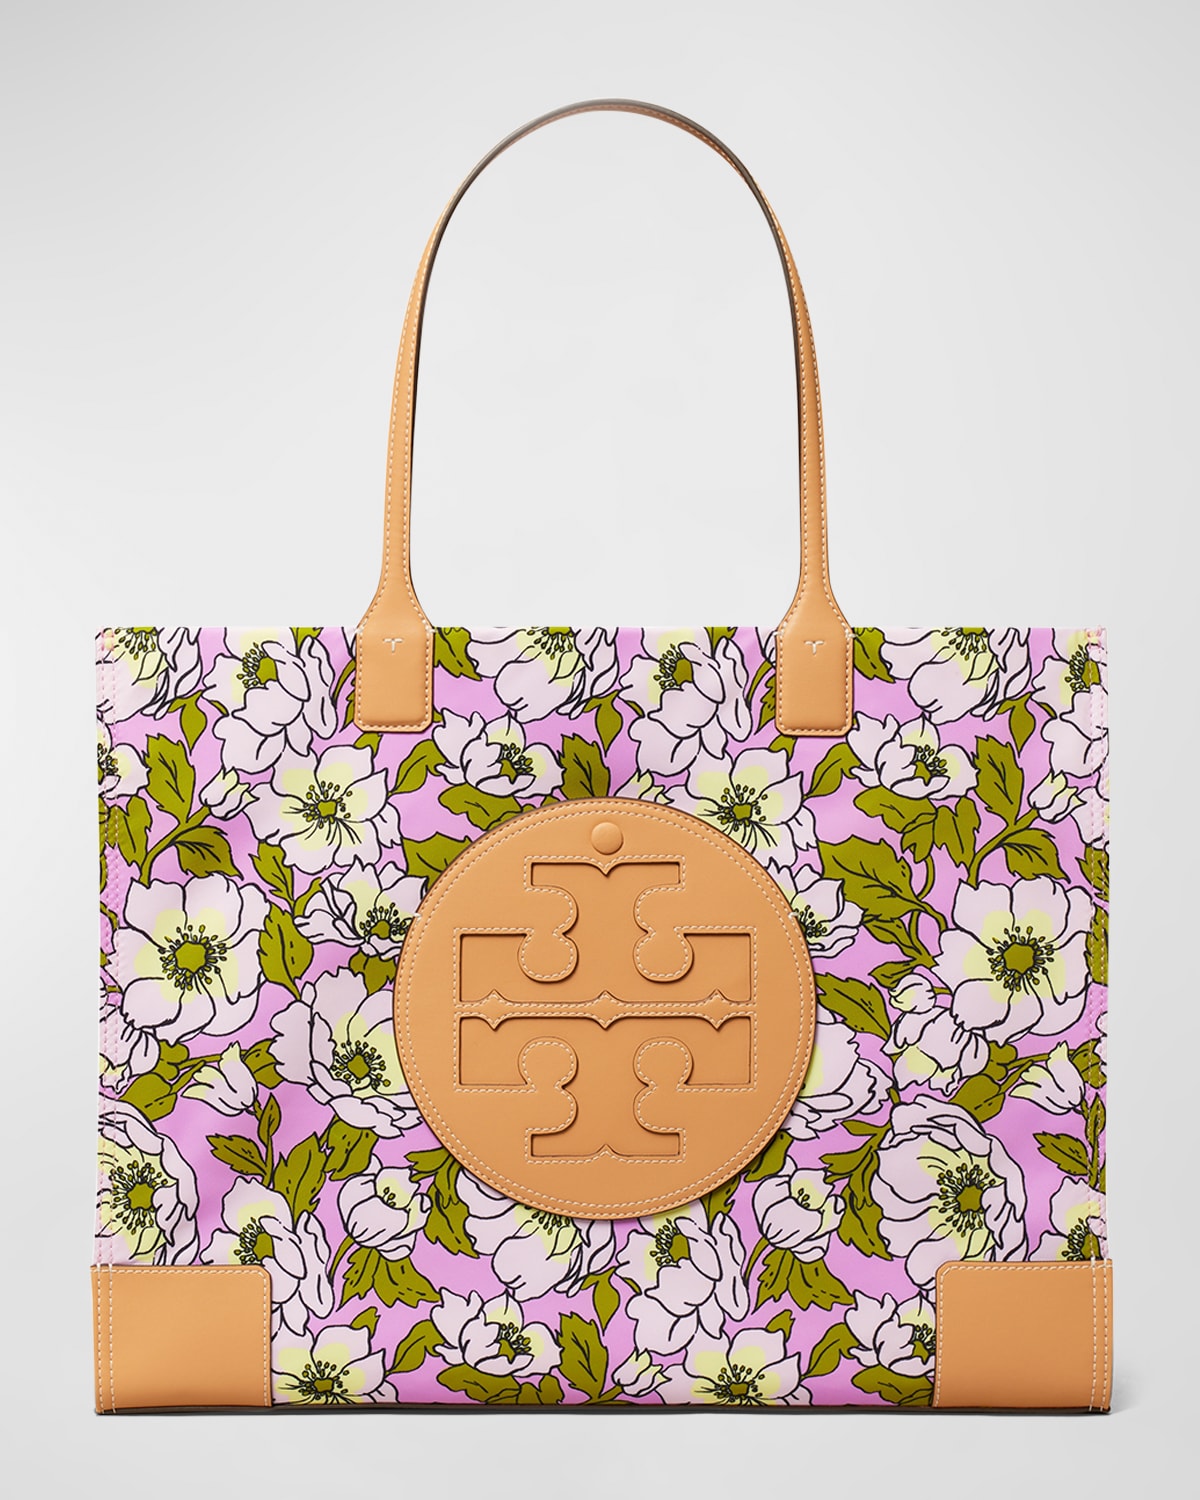 Tory Burch Small Ella Floral Recycled Polyester Tote In Bold Flower